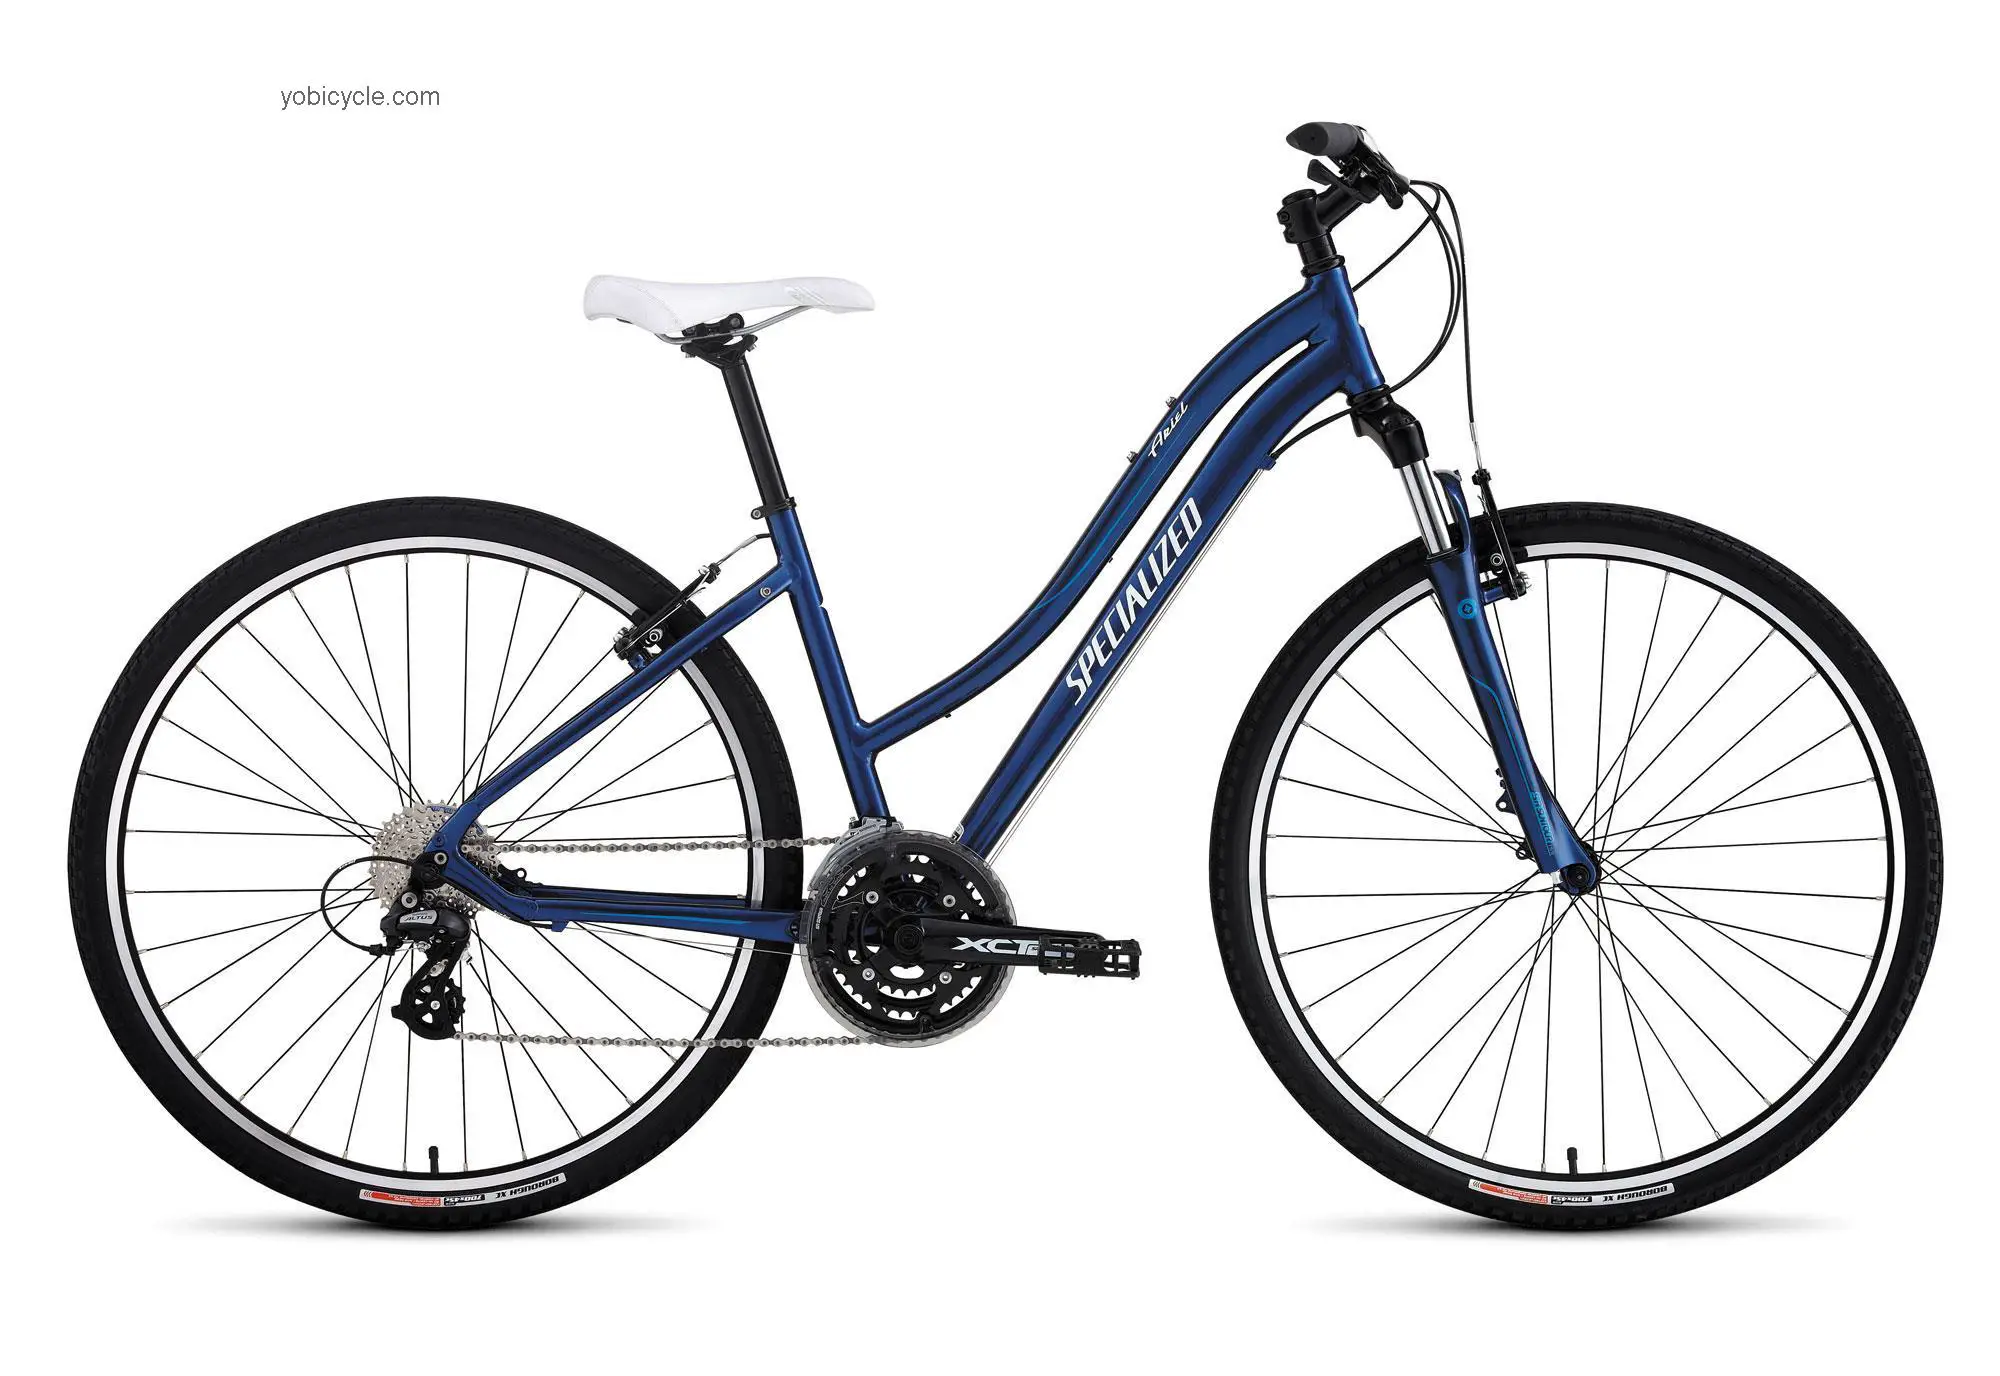 Specialized Ariel Step Through 2012 comparison online with competitors